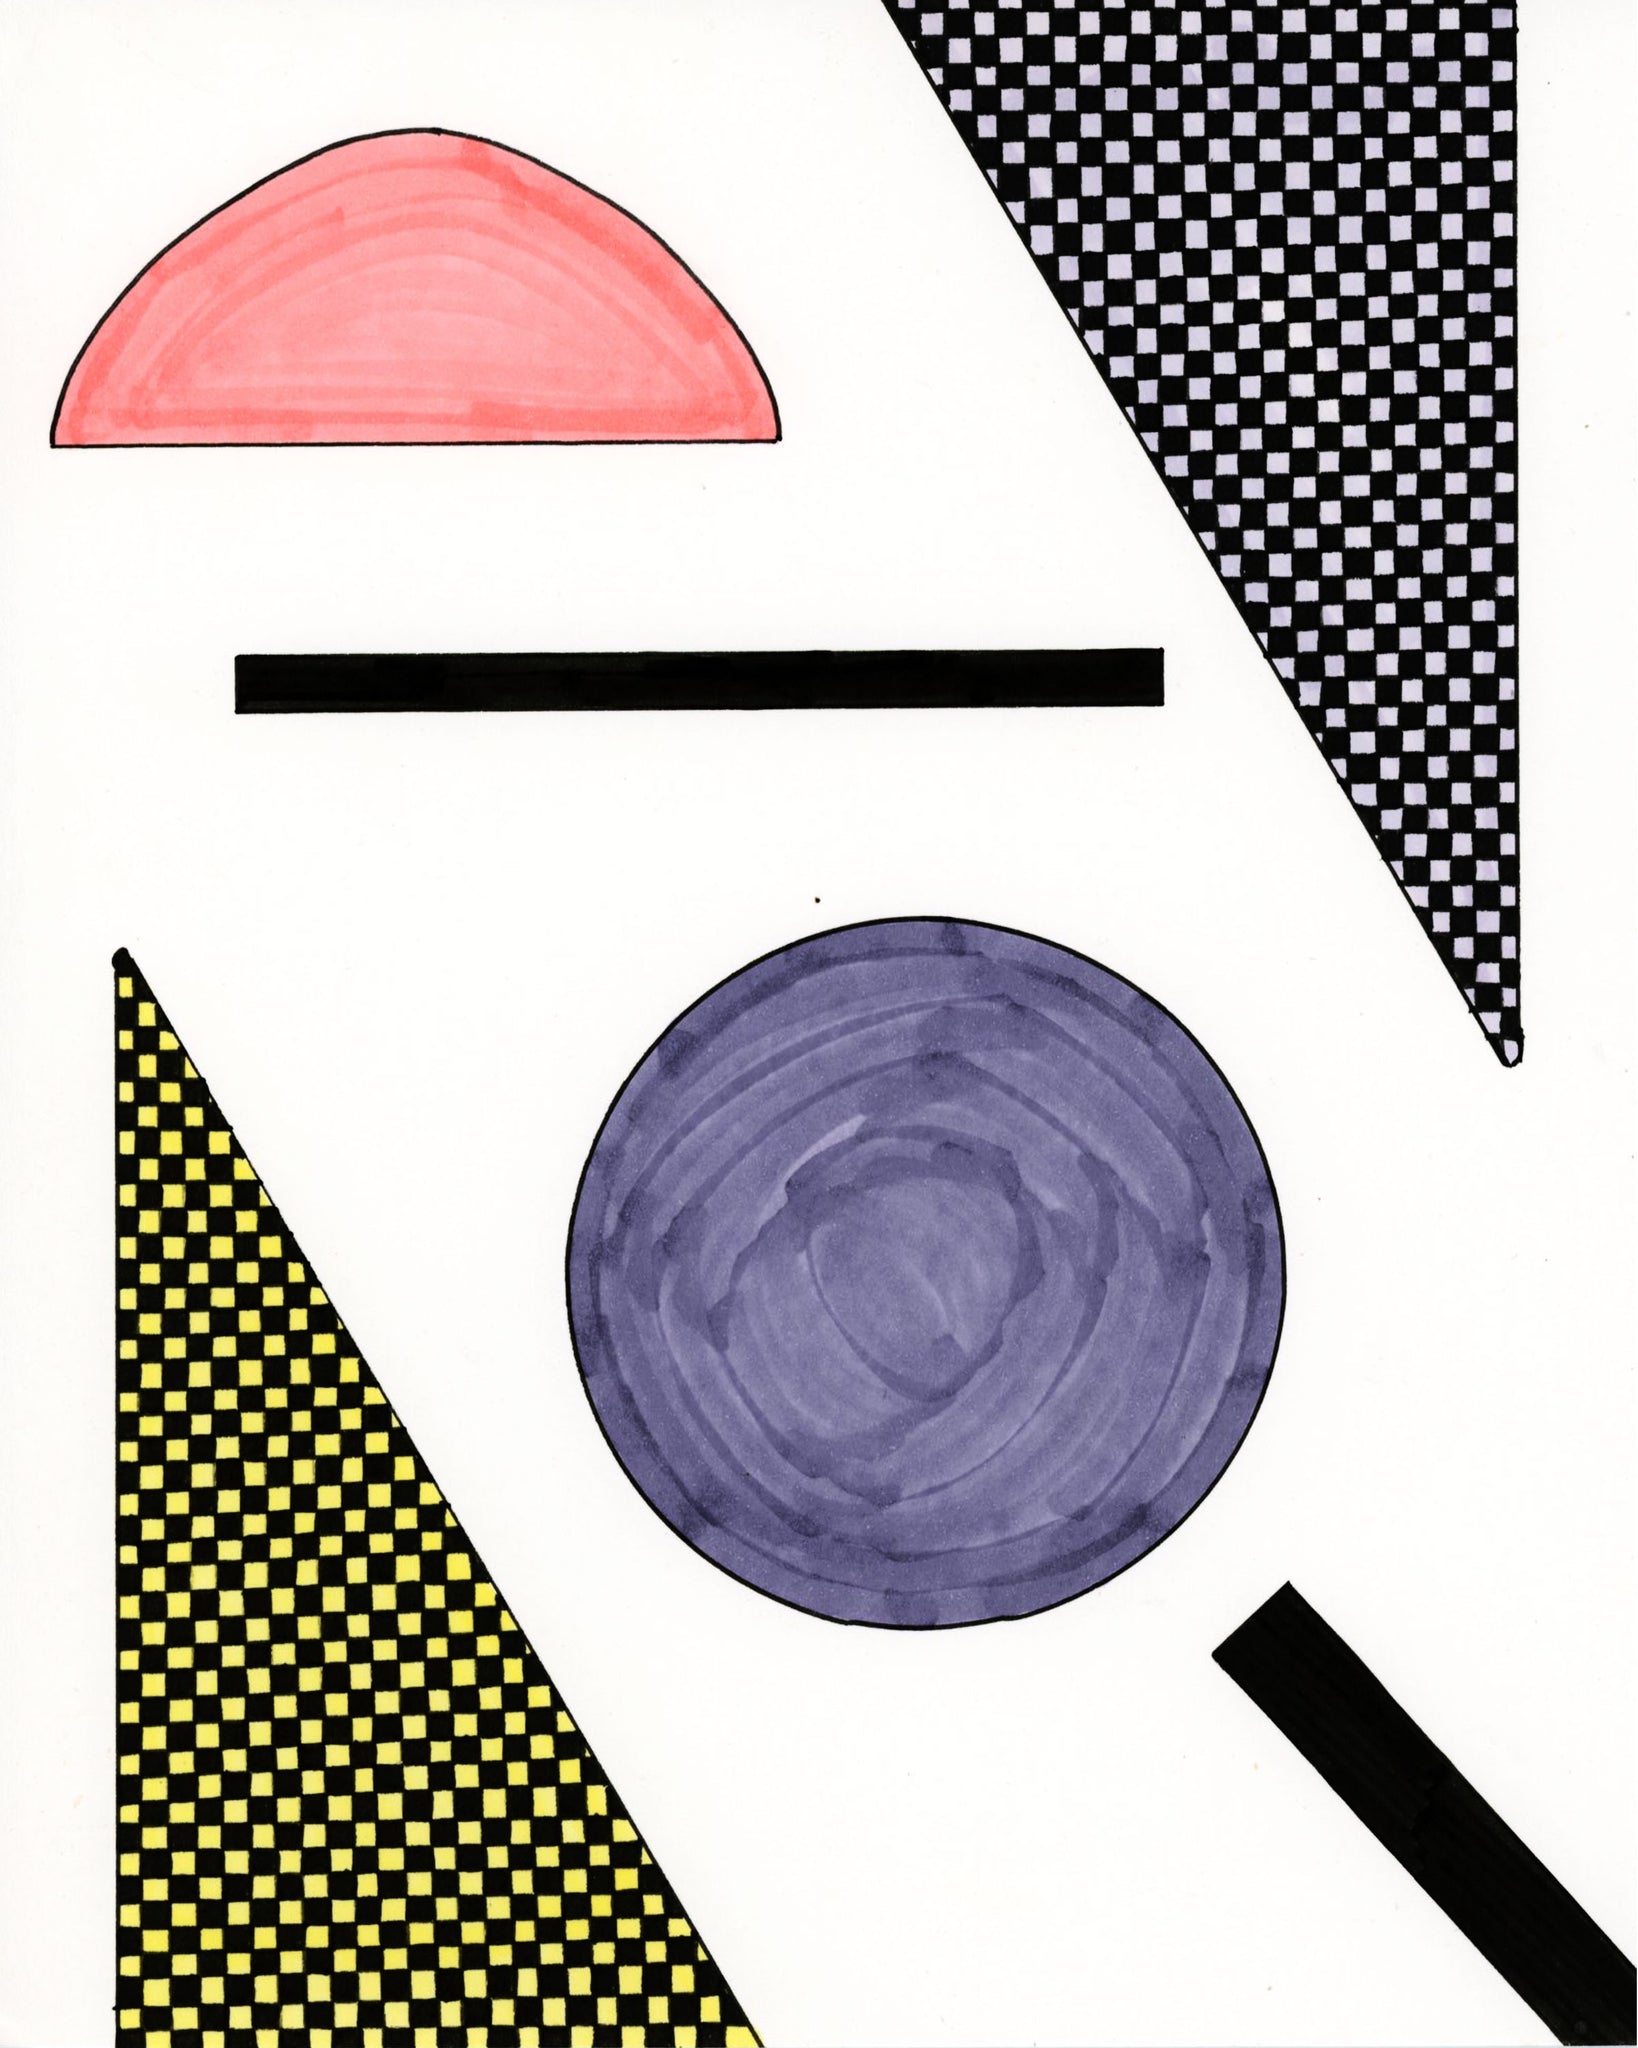 Abstract Colorful Shapes w/ Geometric Patterns